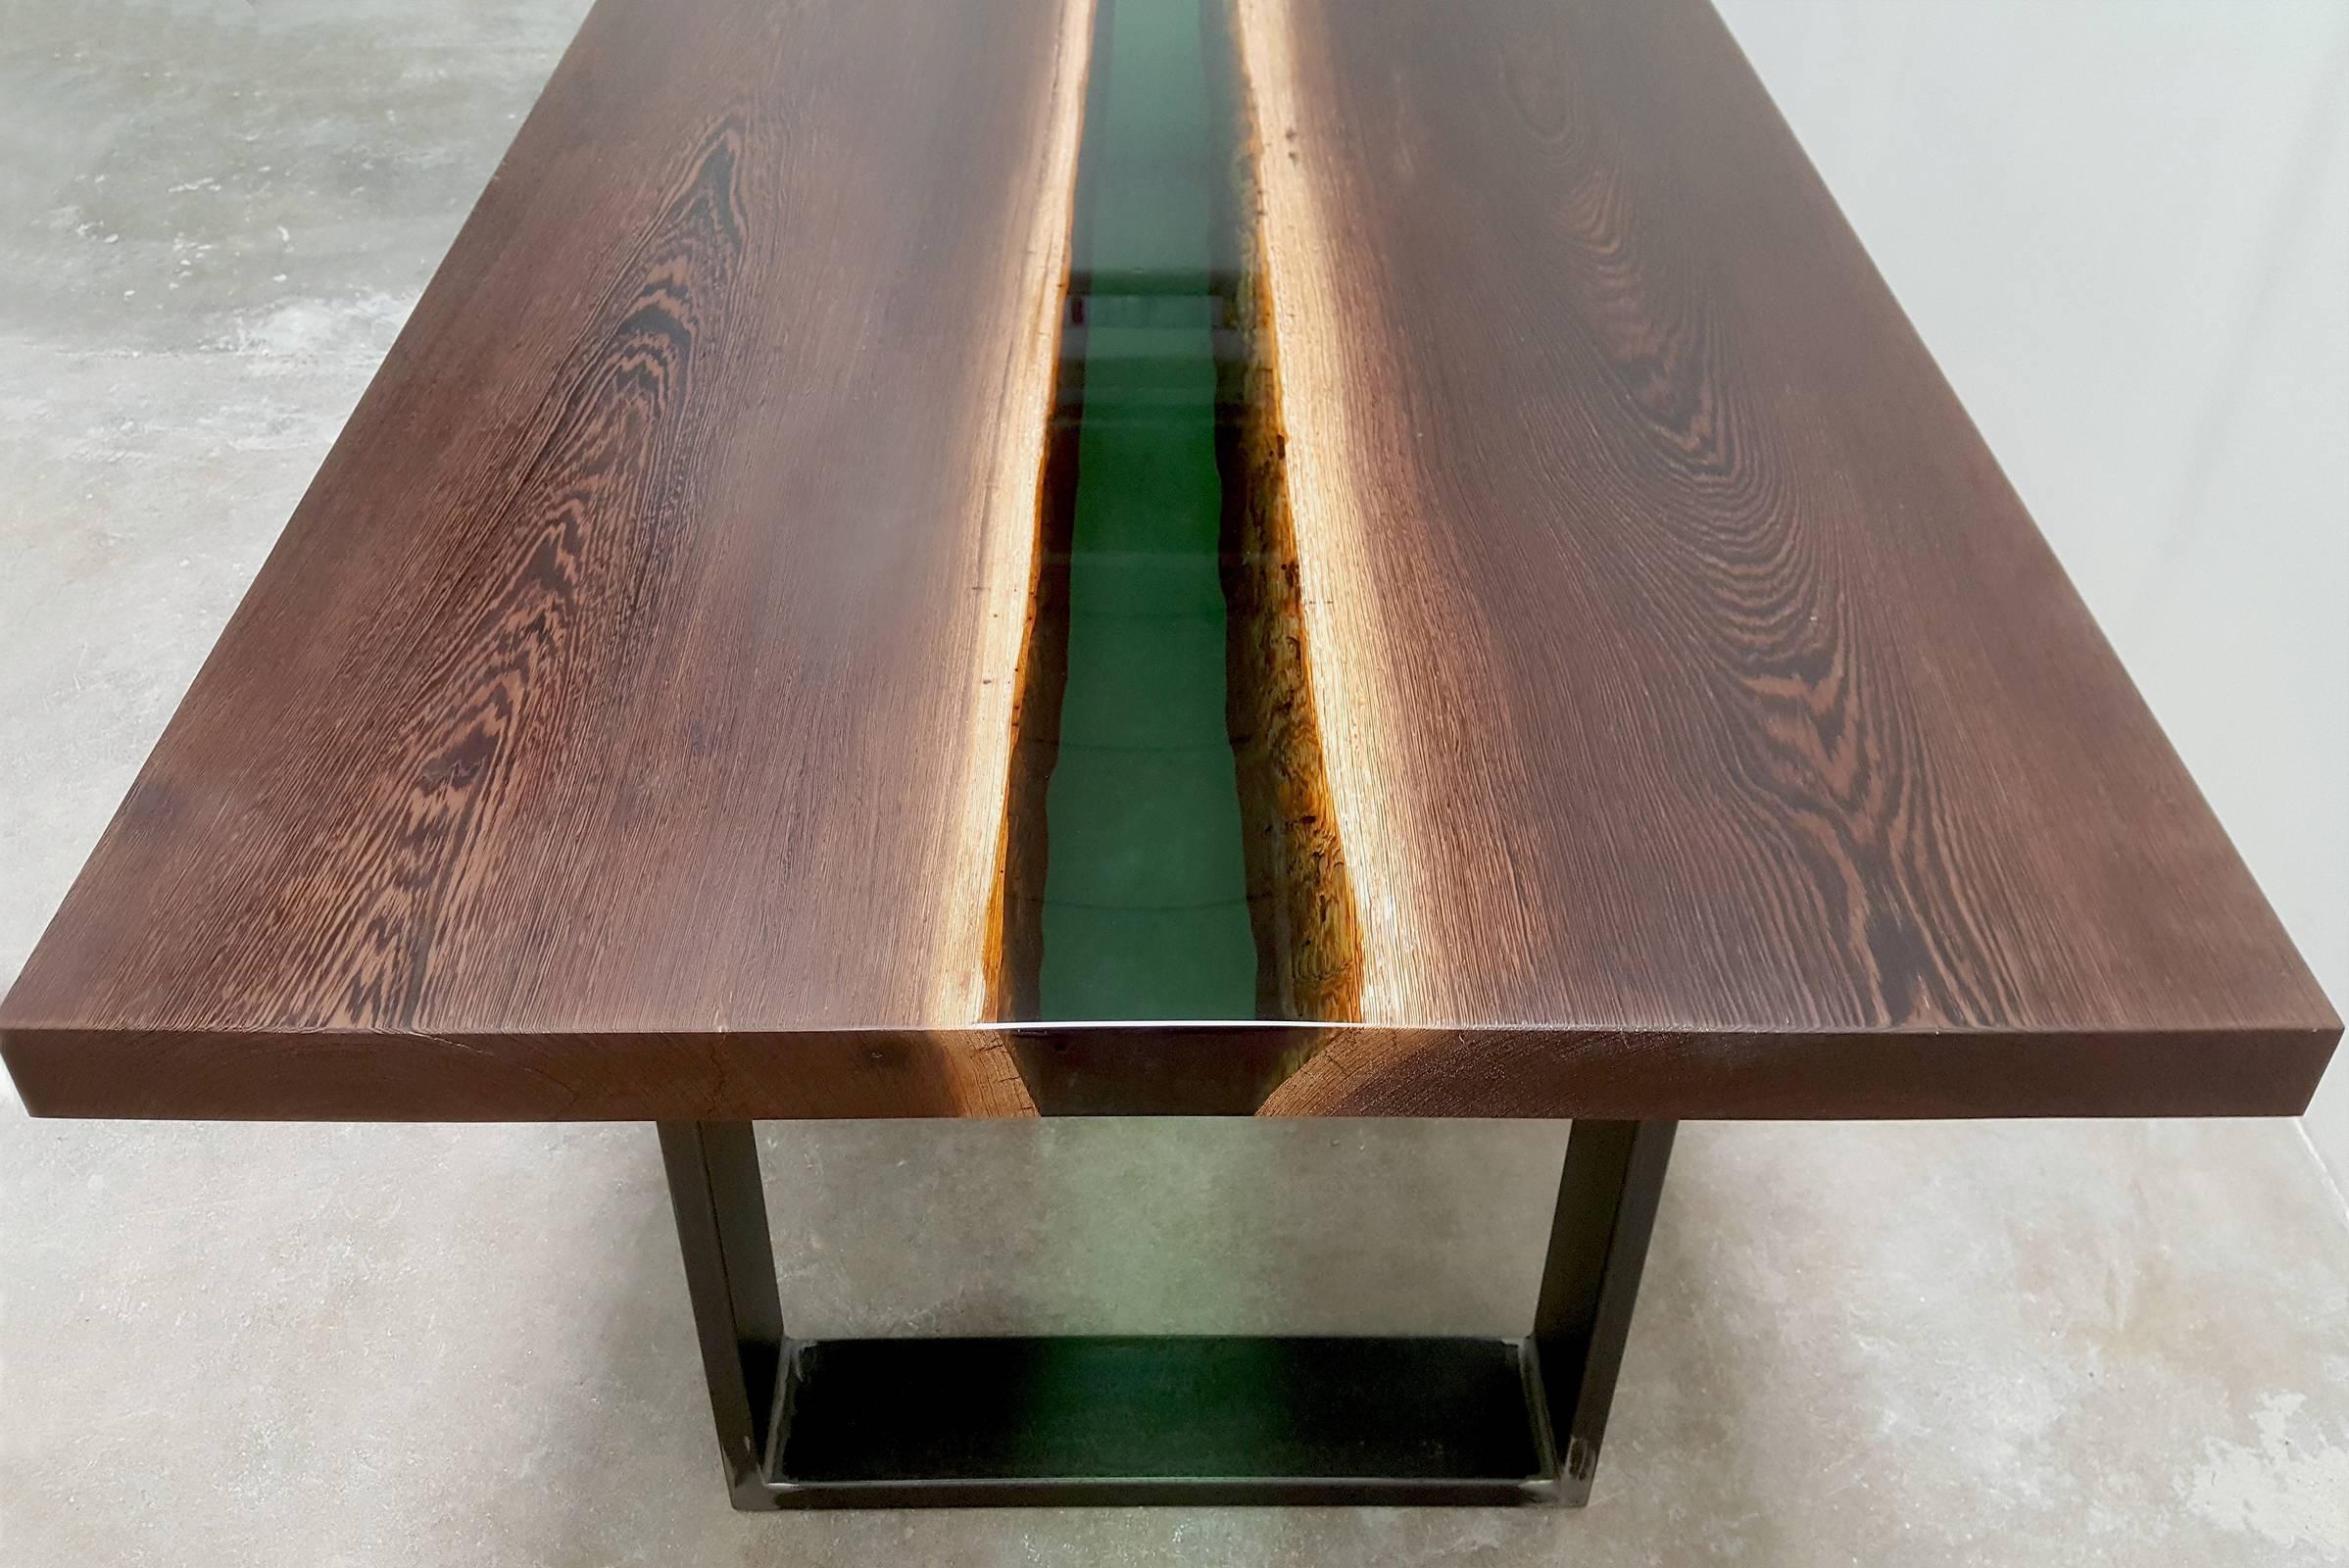 Hand-Crafted Emerald Forest Dinning Table or Conference Table in Wenge Wood and Resin For Sale